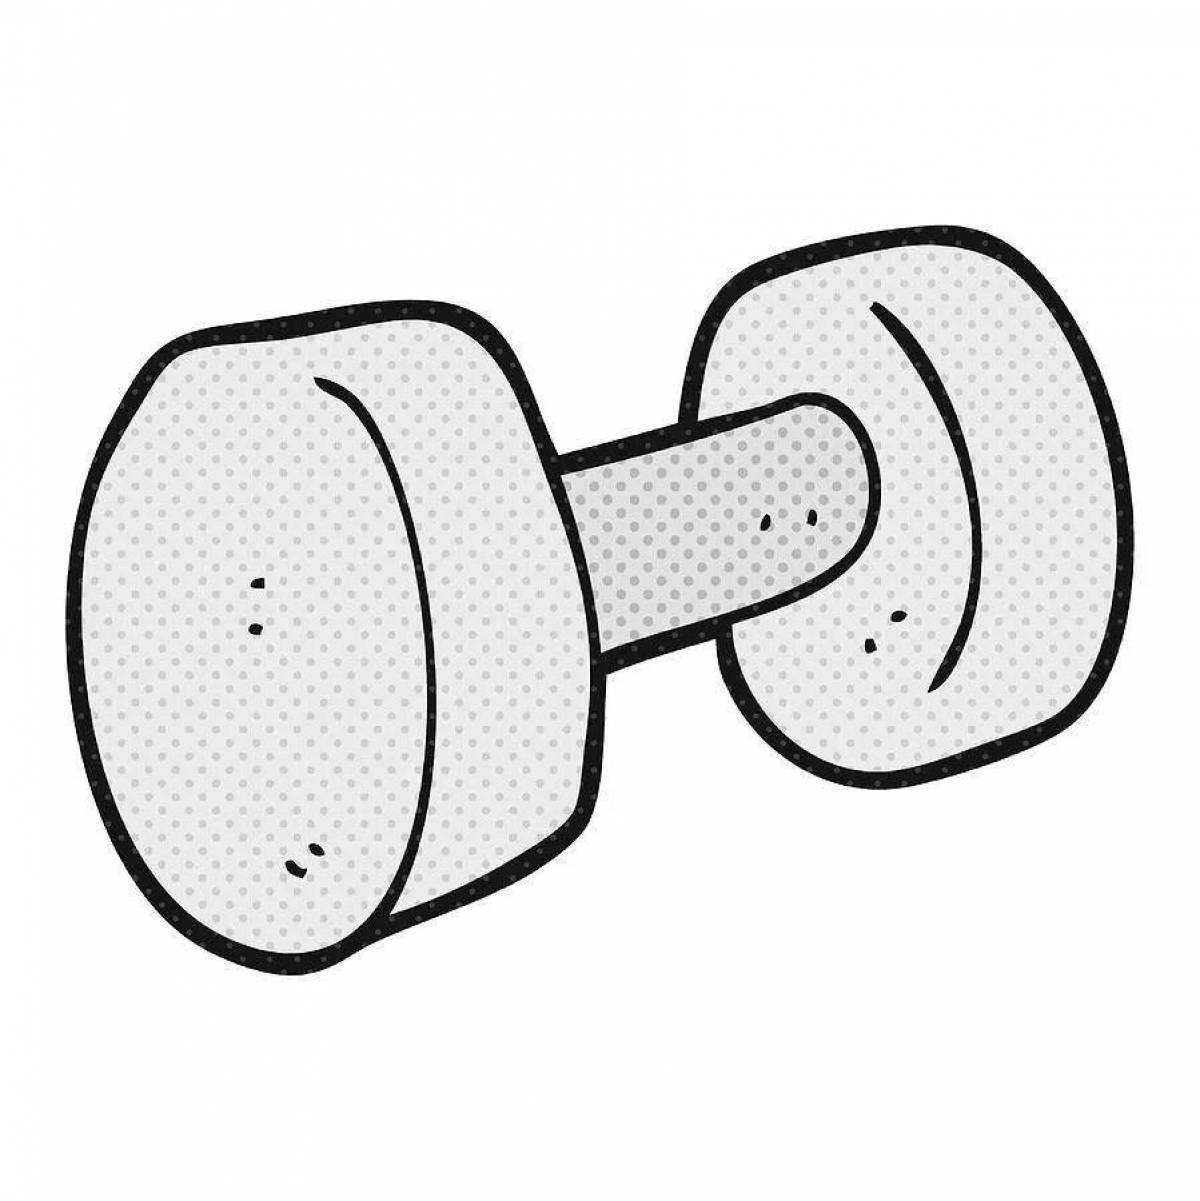 Adorable dumbbell coloring book